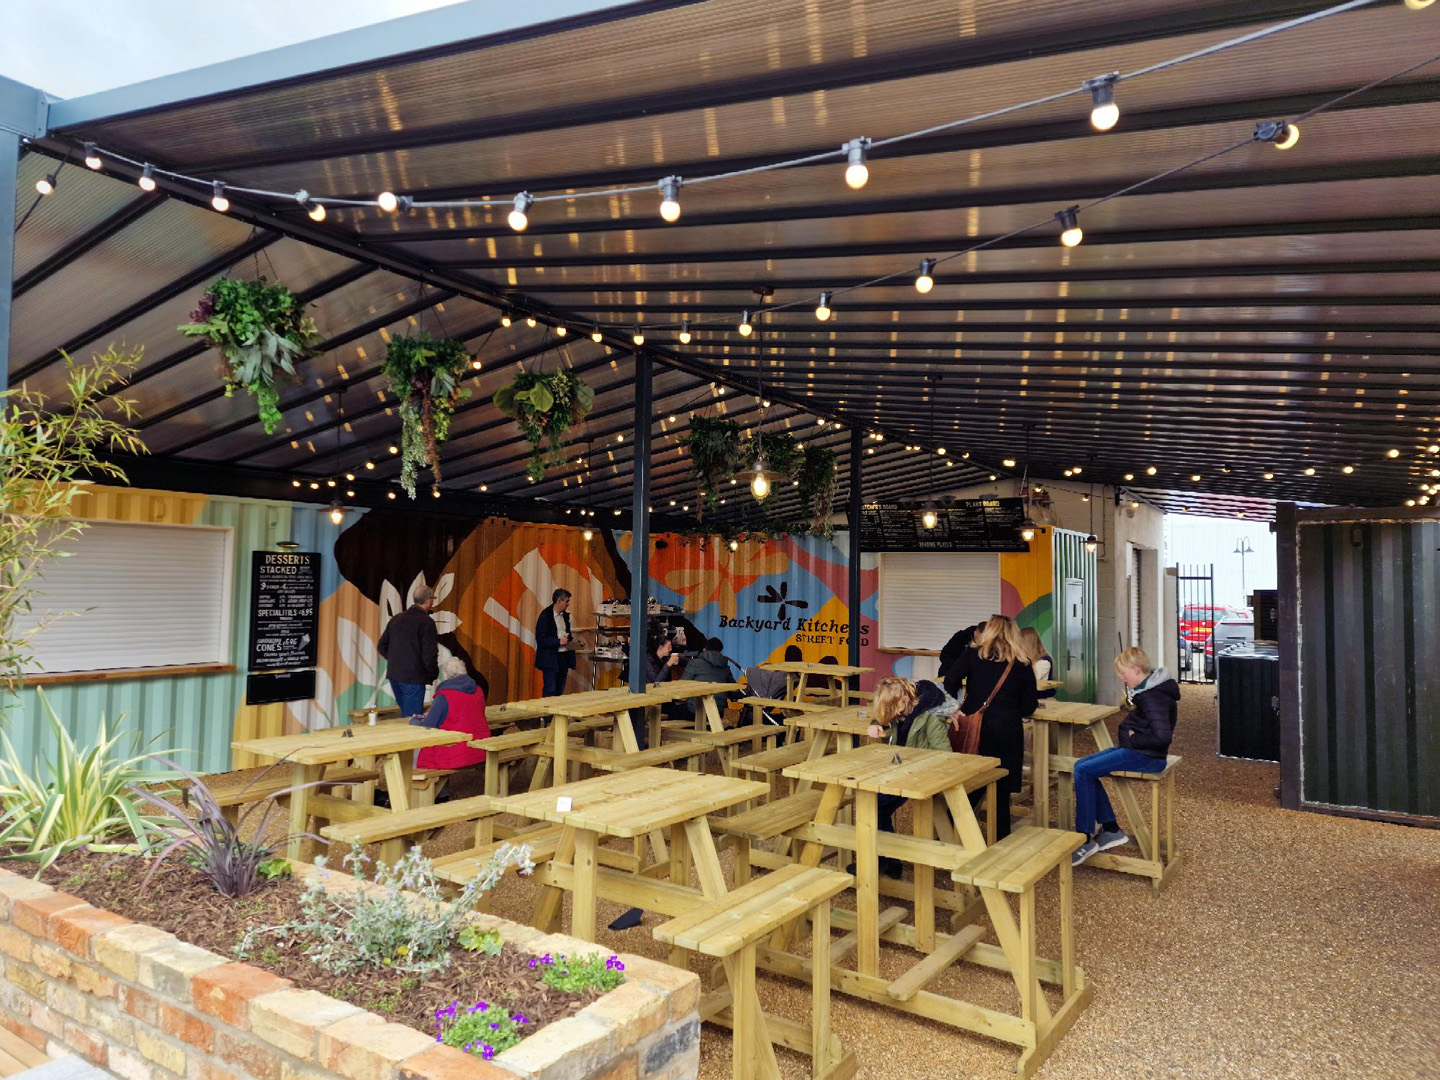 Complex Commercial Canopy Open Air Street Food Ely Cambridge Canopies